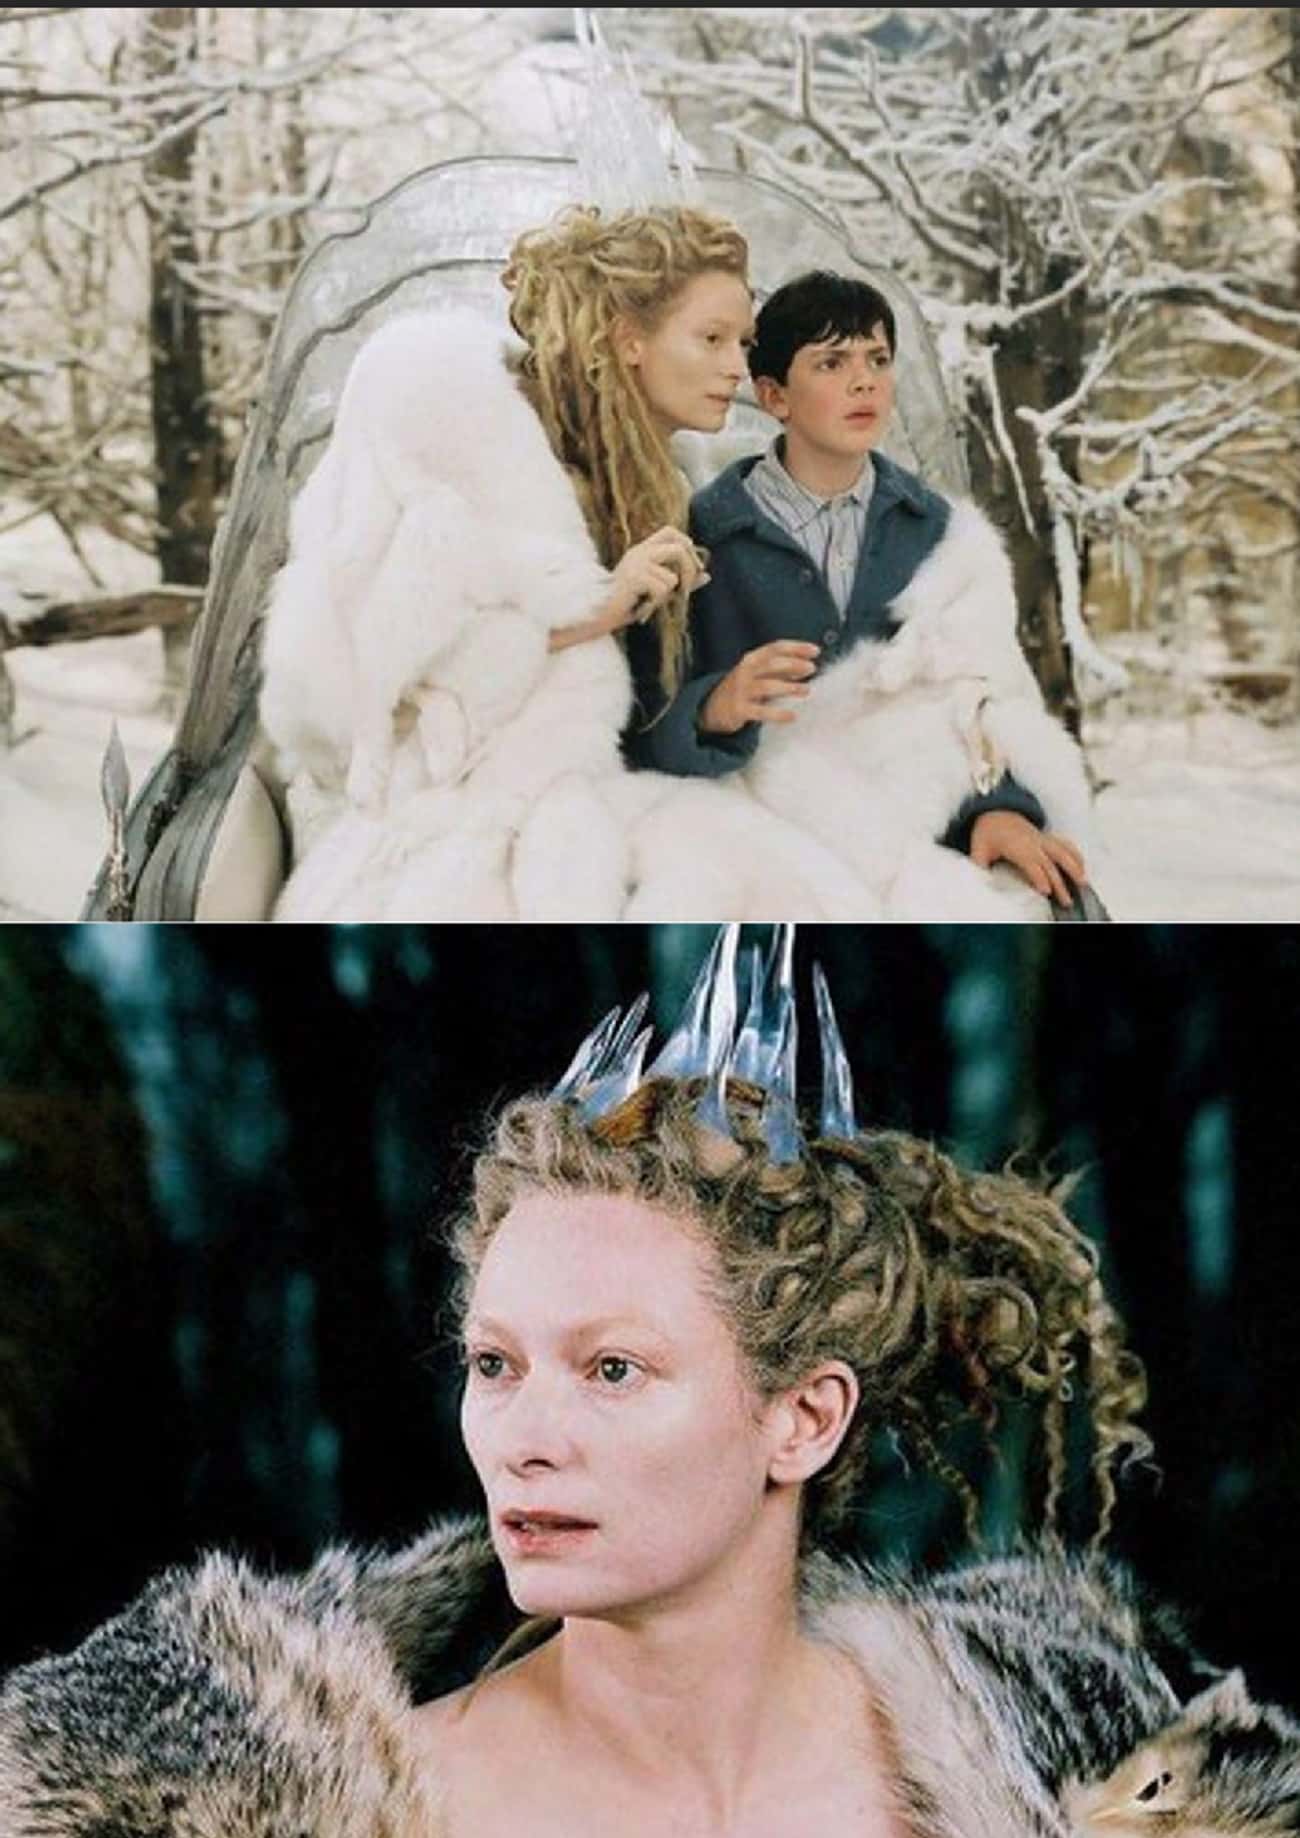 The White Witch's Crown Melts Throughout 'The Chronicles of Narnia: The Lion, The Witch And The Wardrobe'